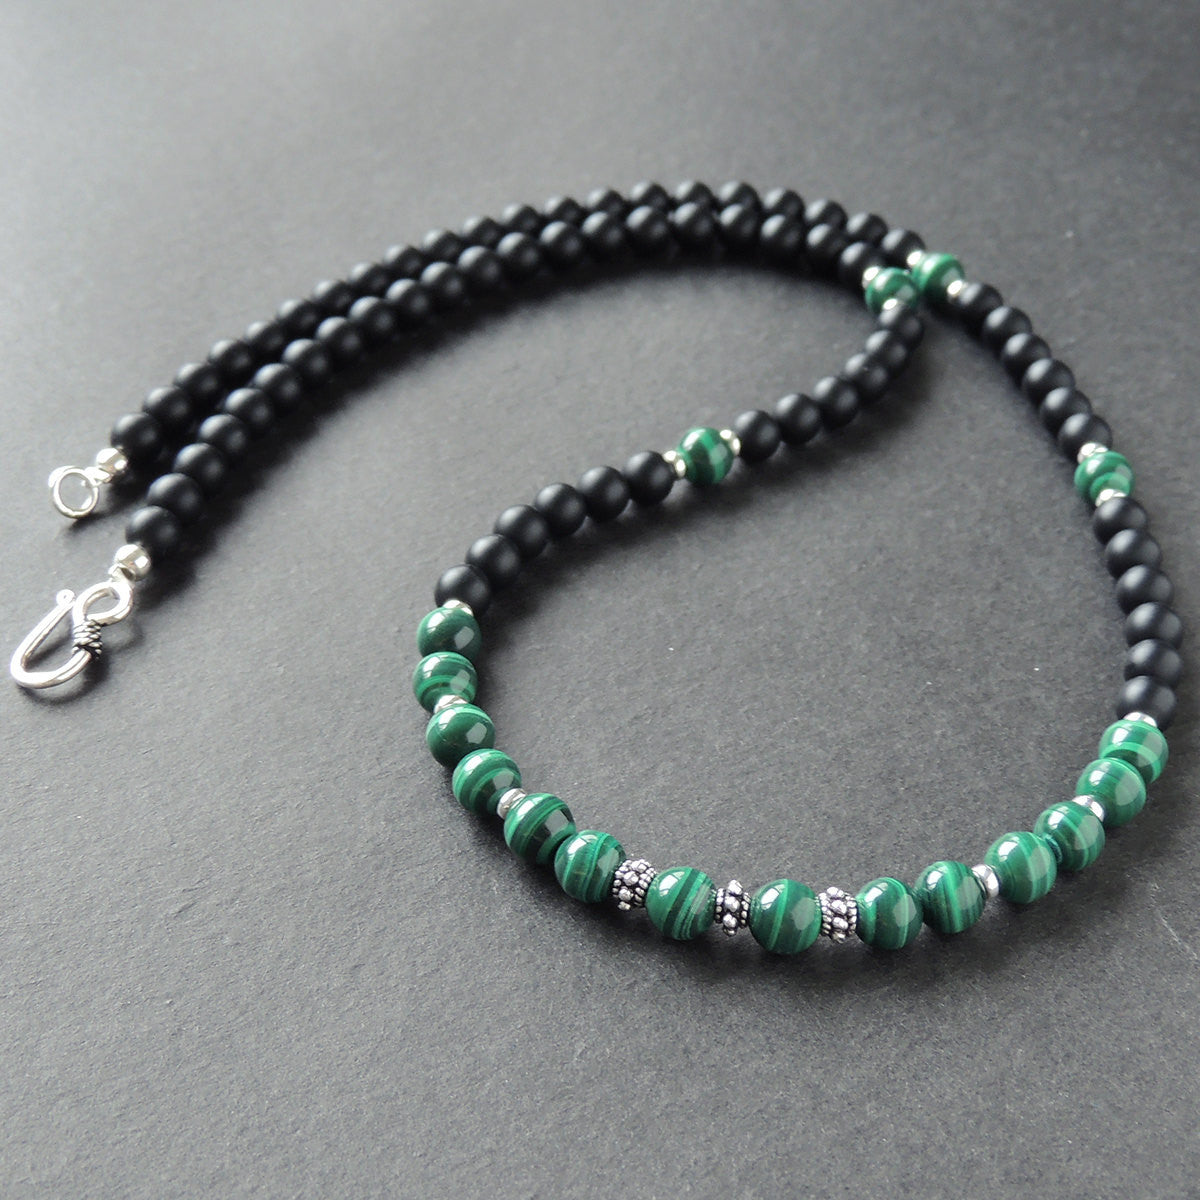 Malachite & Matte Black Onyx Healing Gemstone Necklace with S925 Sterling Silver Spacer Beads & S-hook Clasp - Handmade by Gem & Silver NK084